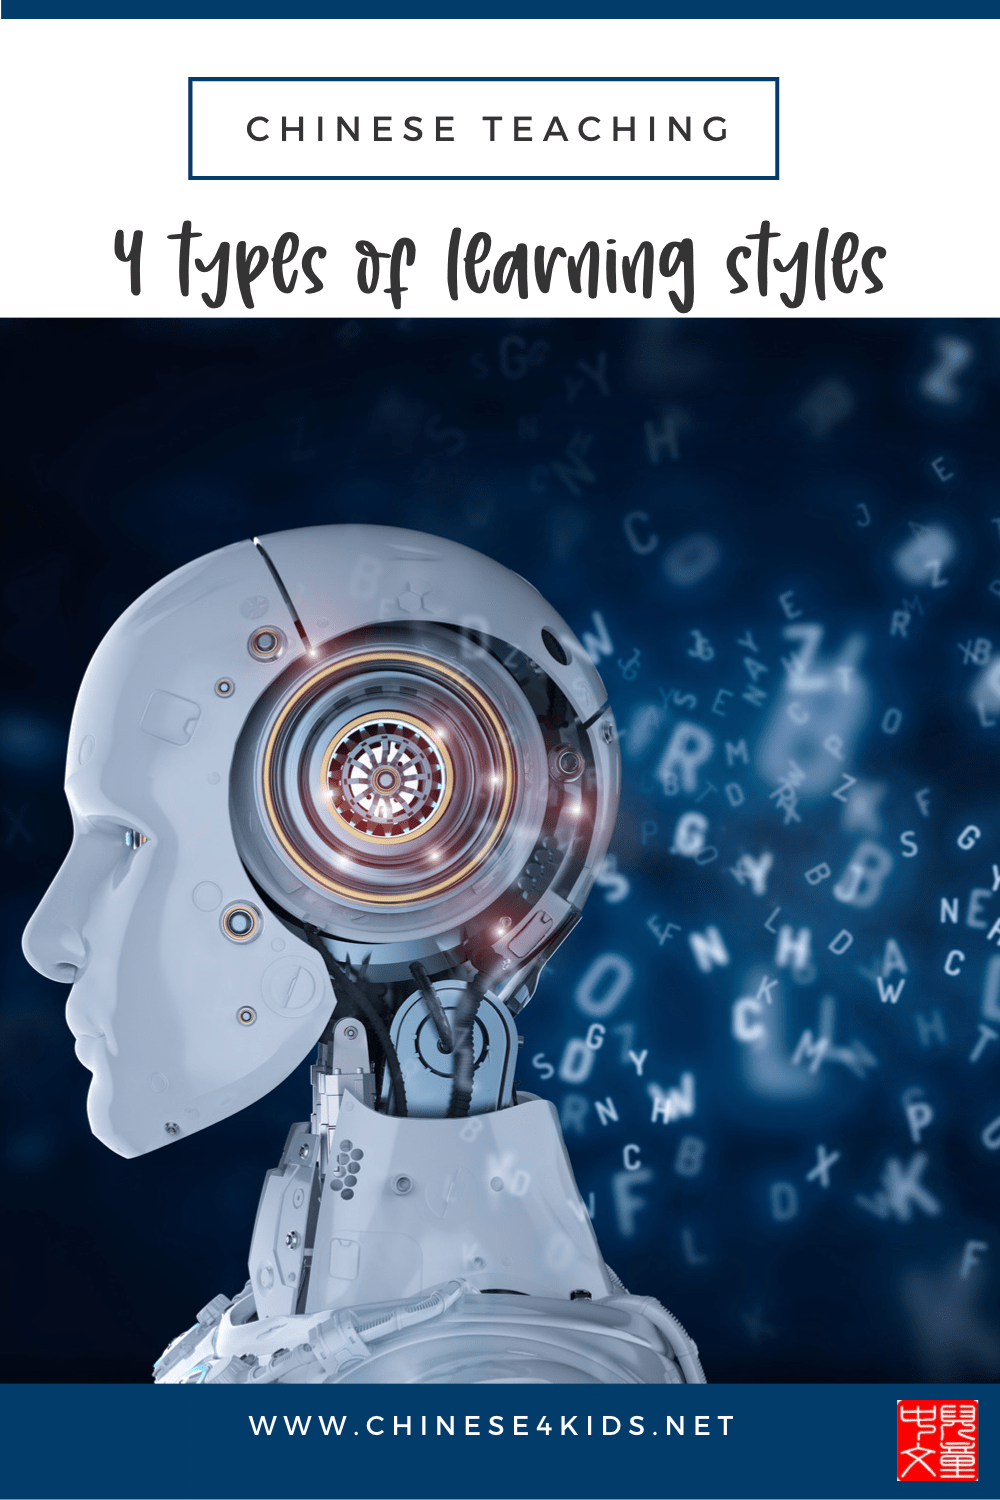 Chinese learners have different preferences in terms of learning. Based on VARK model, there are 4 types of learning styles: visual, auditory, reading/writing, and kinesthetic. #Chinese4kids #Chineselearning #learningstyles #howtolearn #Chineseteaching